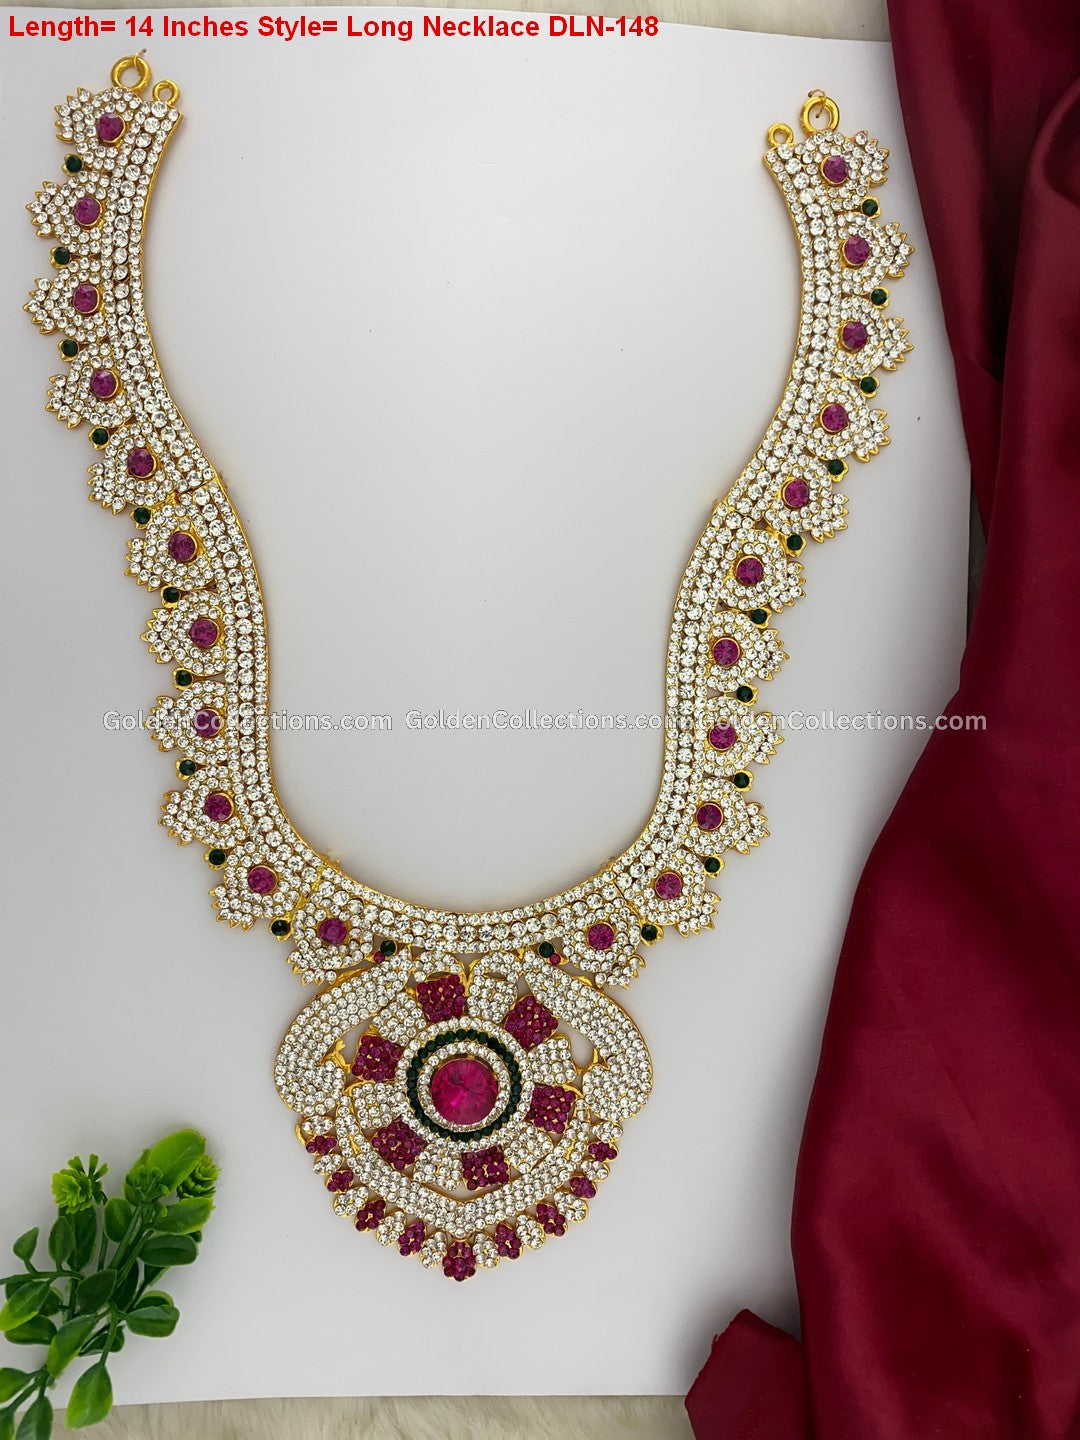 Jhumka Long Harams: Adornments with Elegant Earrings DLN-148